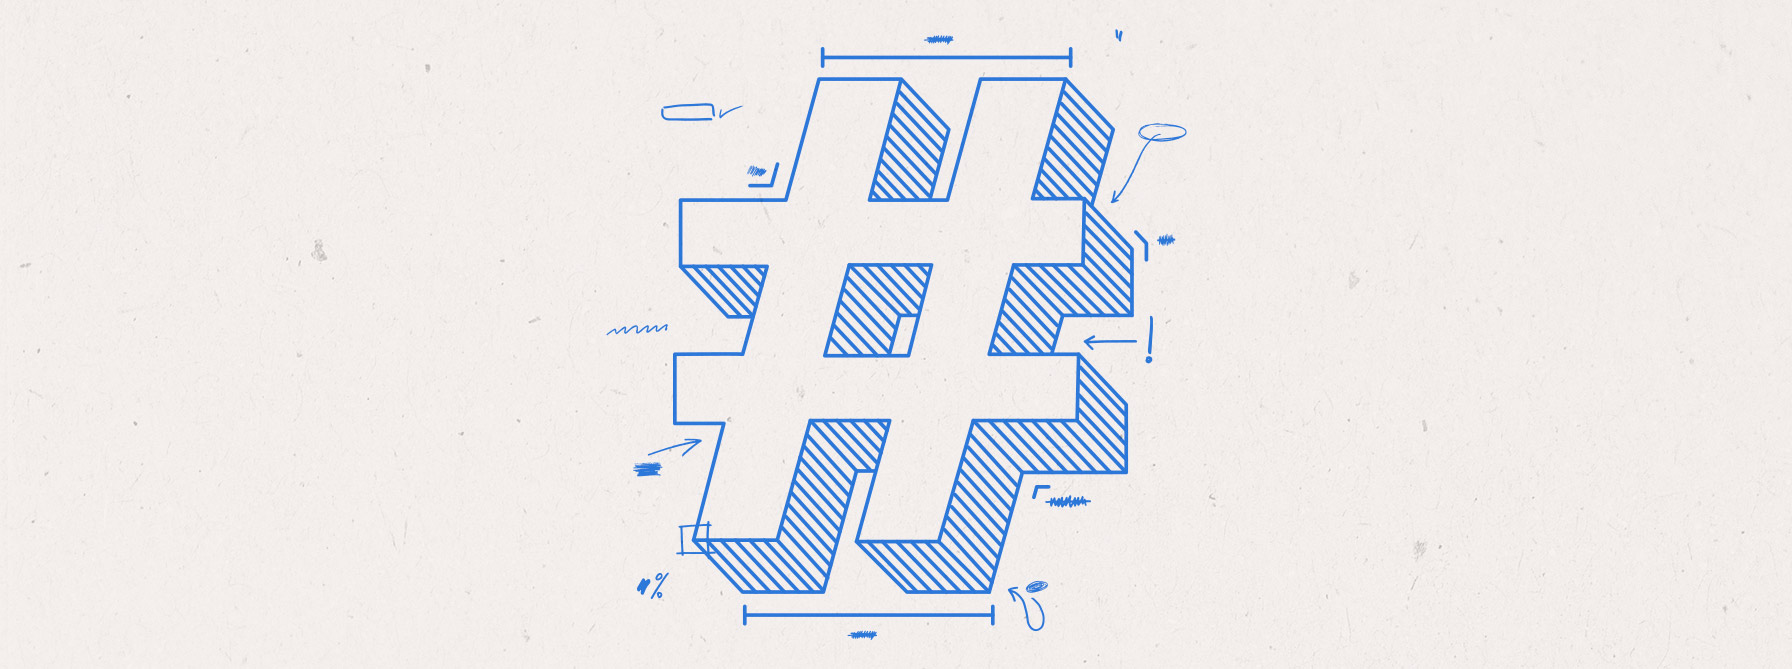 Don’t underestimate the value of a well-crafted hashtag strategy